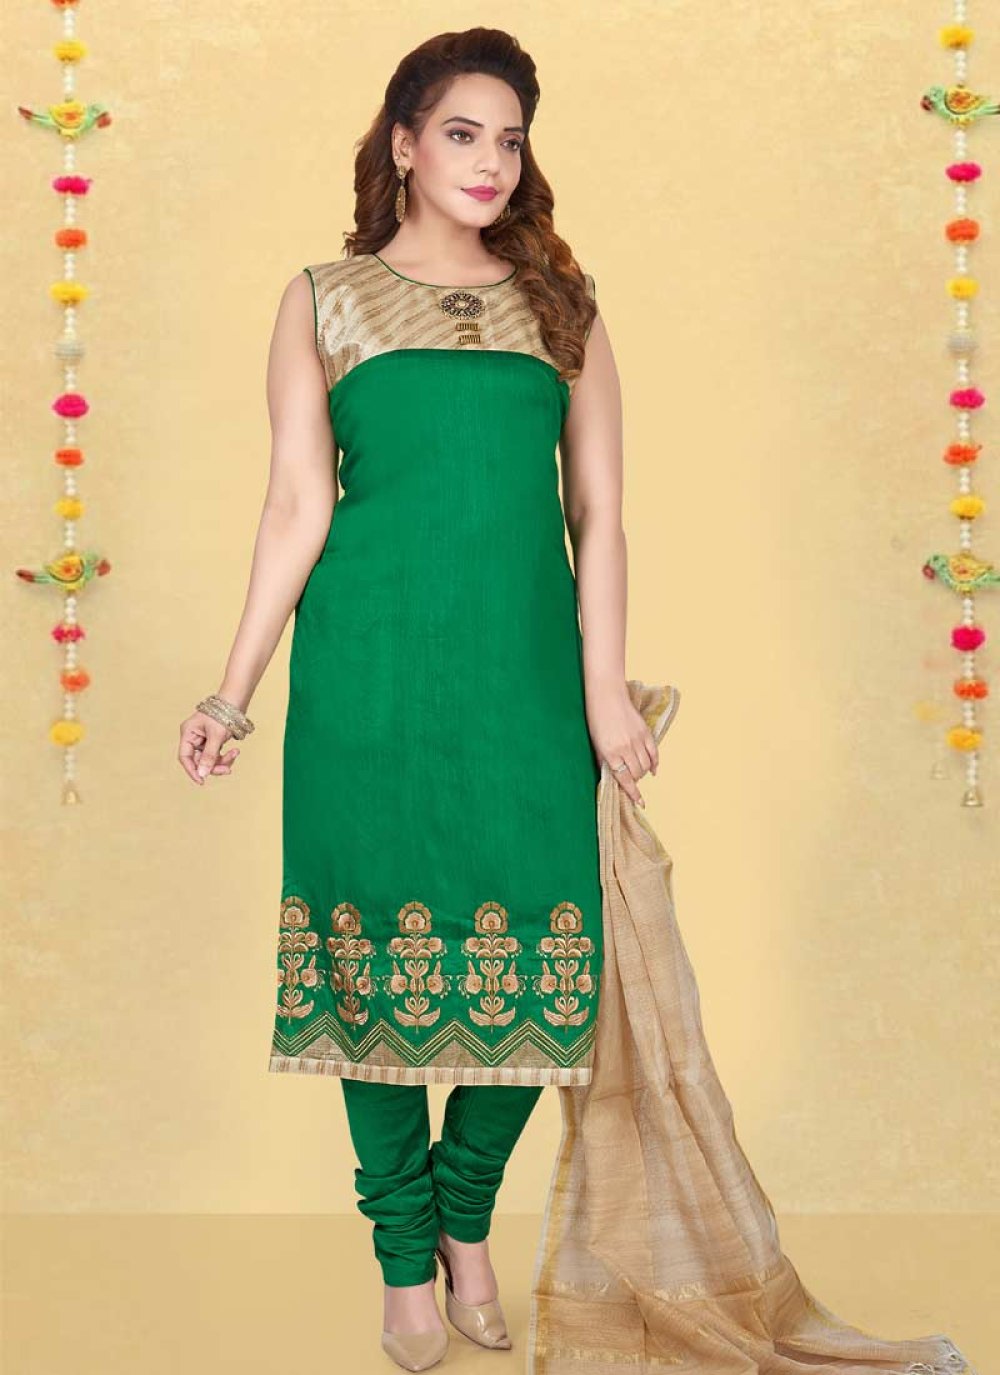 Ready to Wear Designer Cotton fabric Churidar Salwar Suit With Bottom &  Dupatta For Women (3 Piece Suit) : Clothing, Shoes & Jewelry - Amazon.com